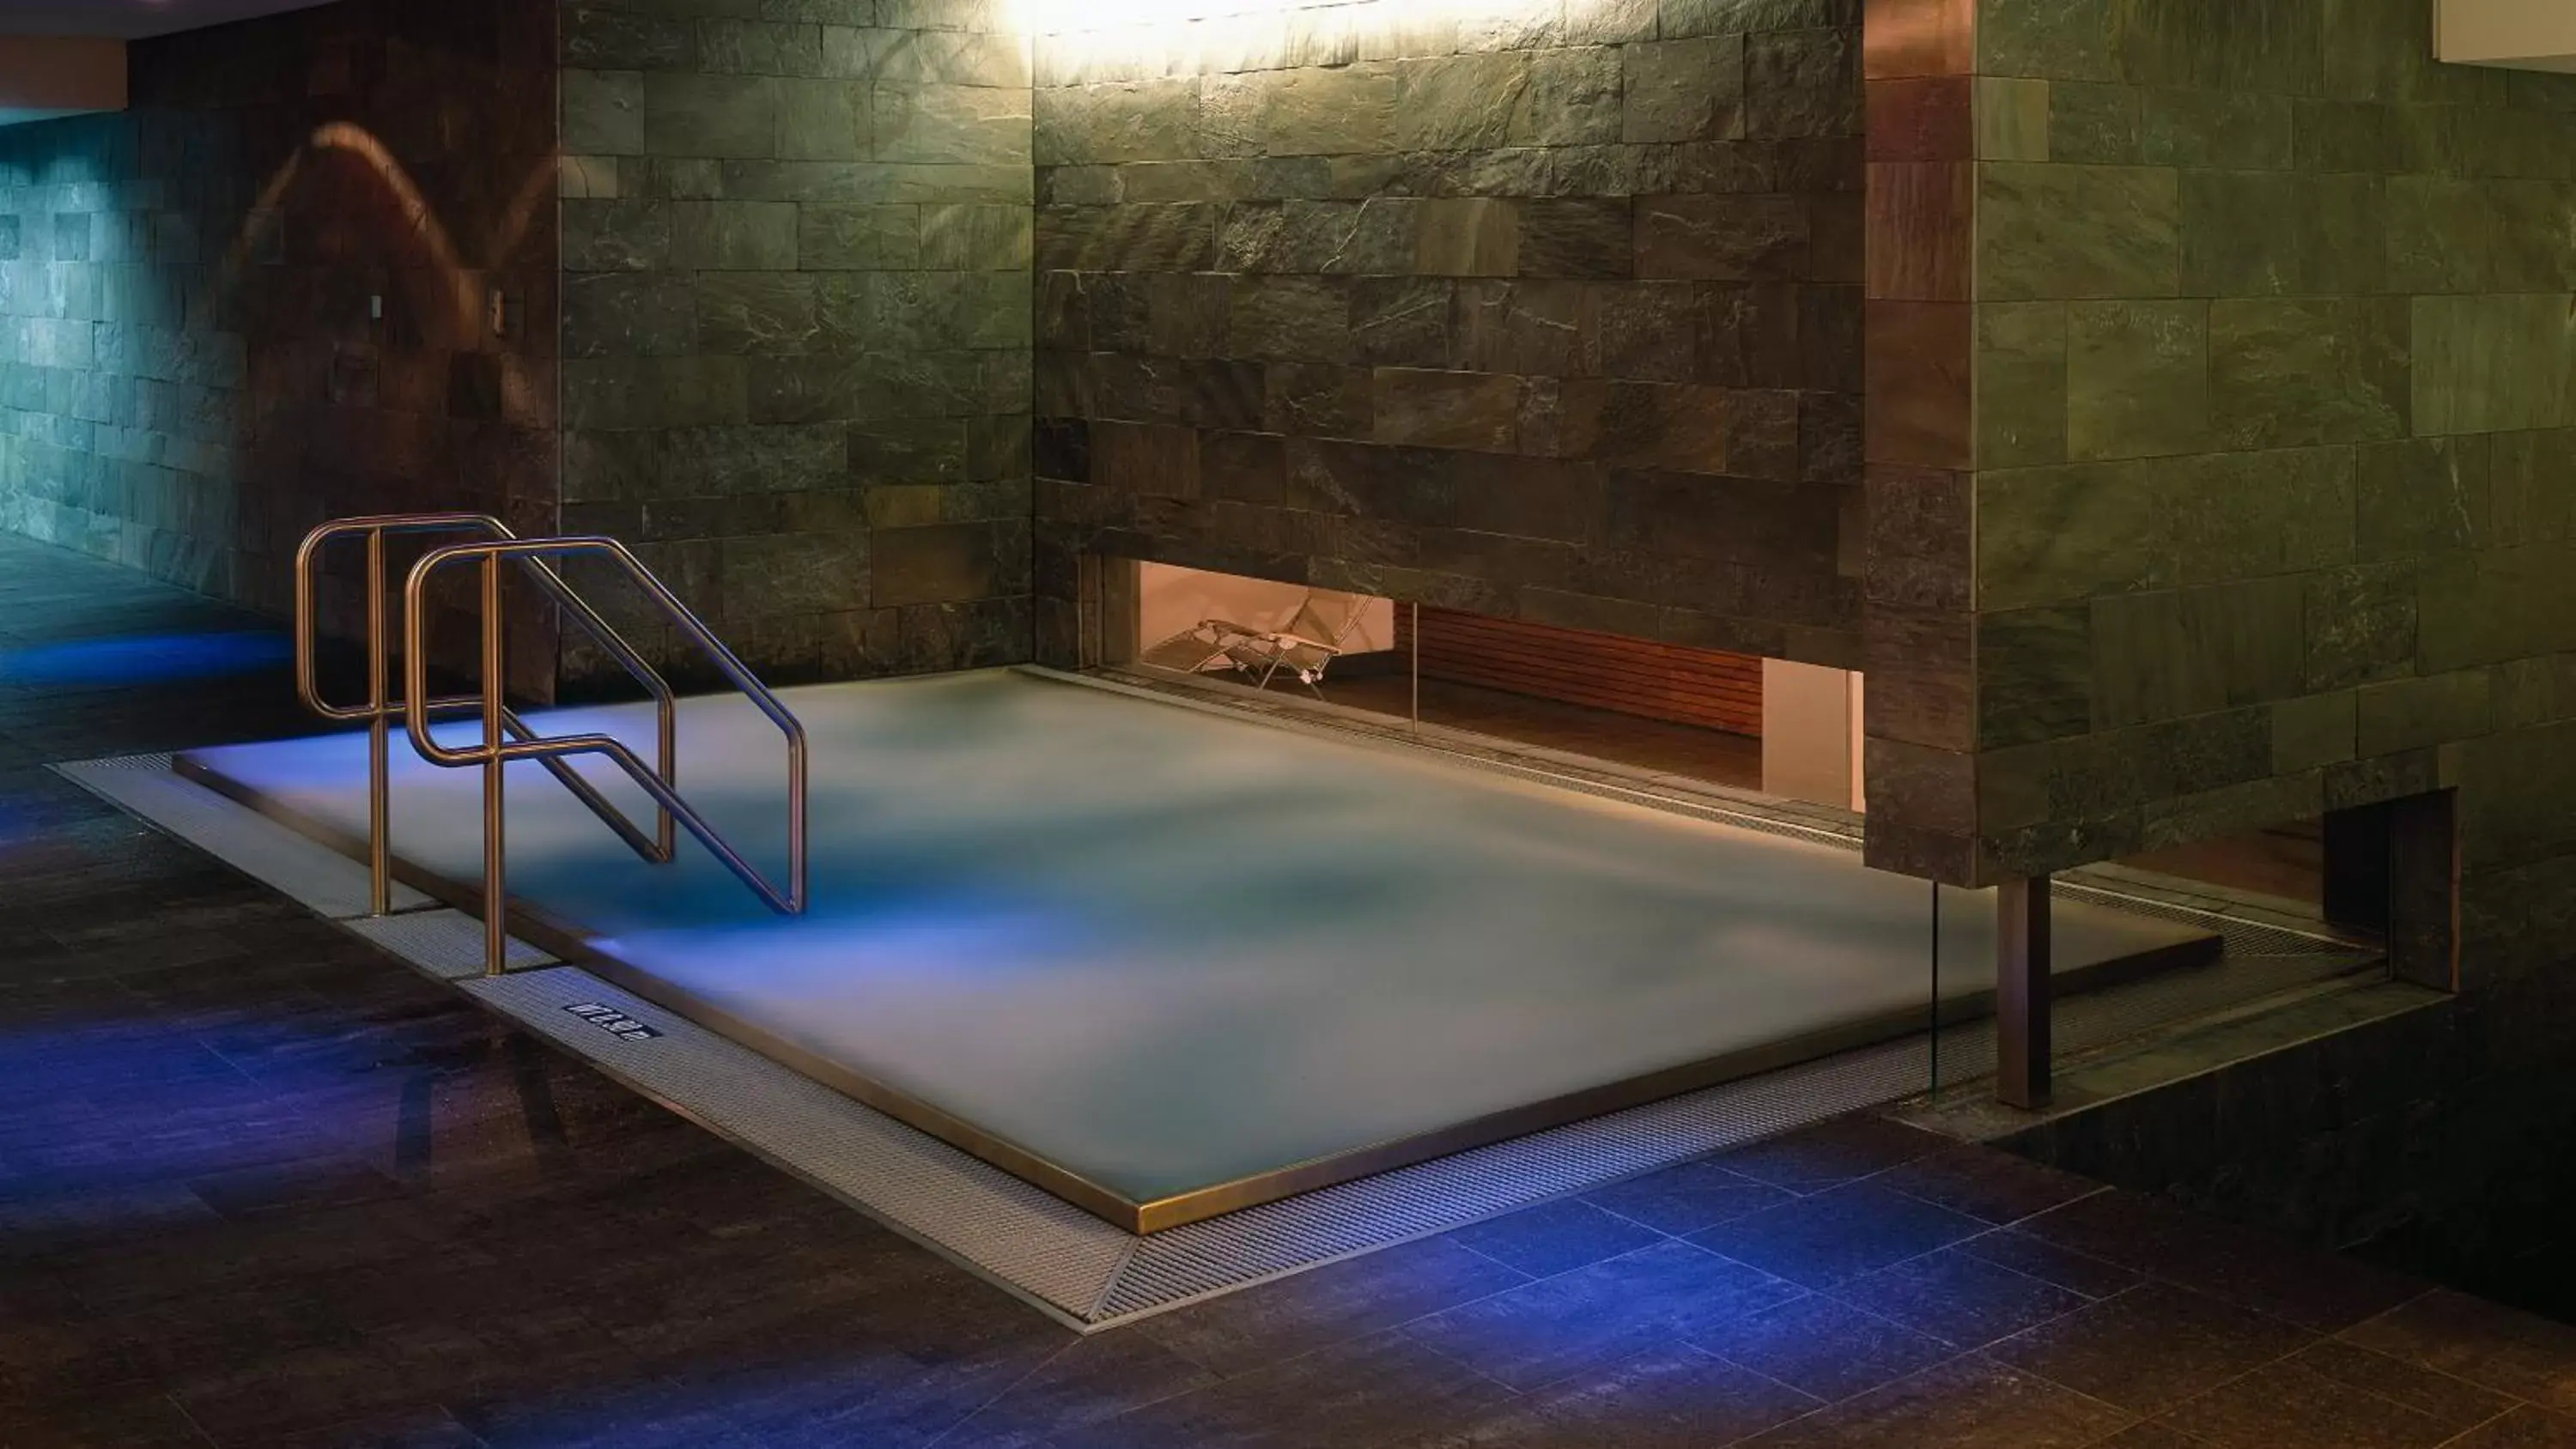 Hot Tub, Swimming Pool in Hotel Kö59 Düsseldorf - Member of Hommage Luxury Hotels Collection